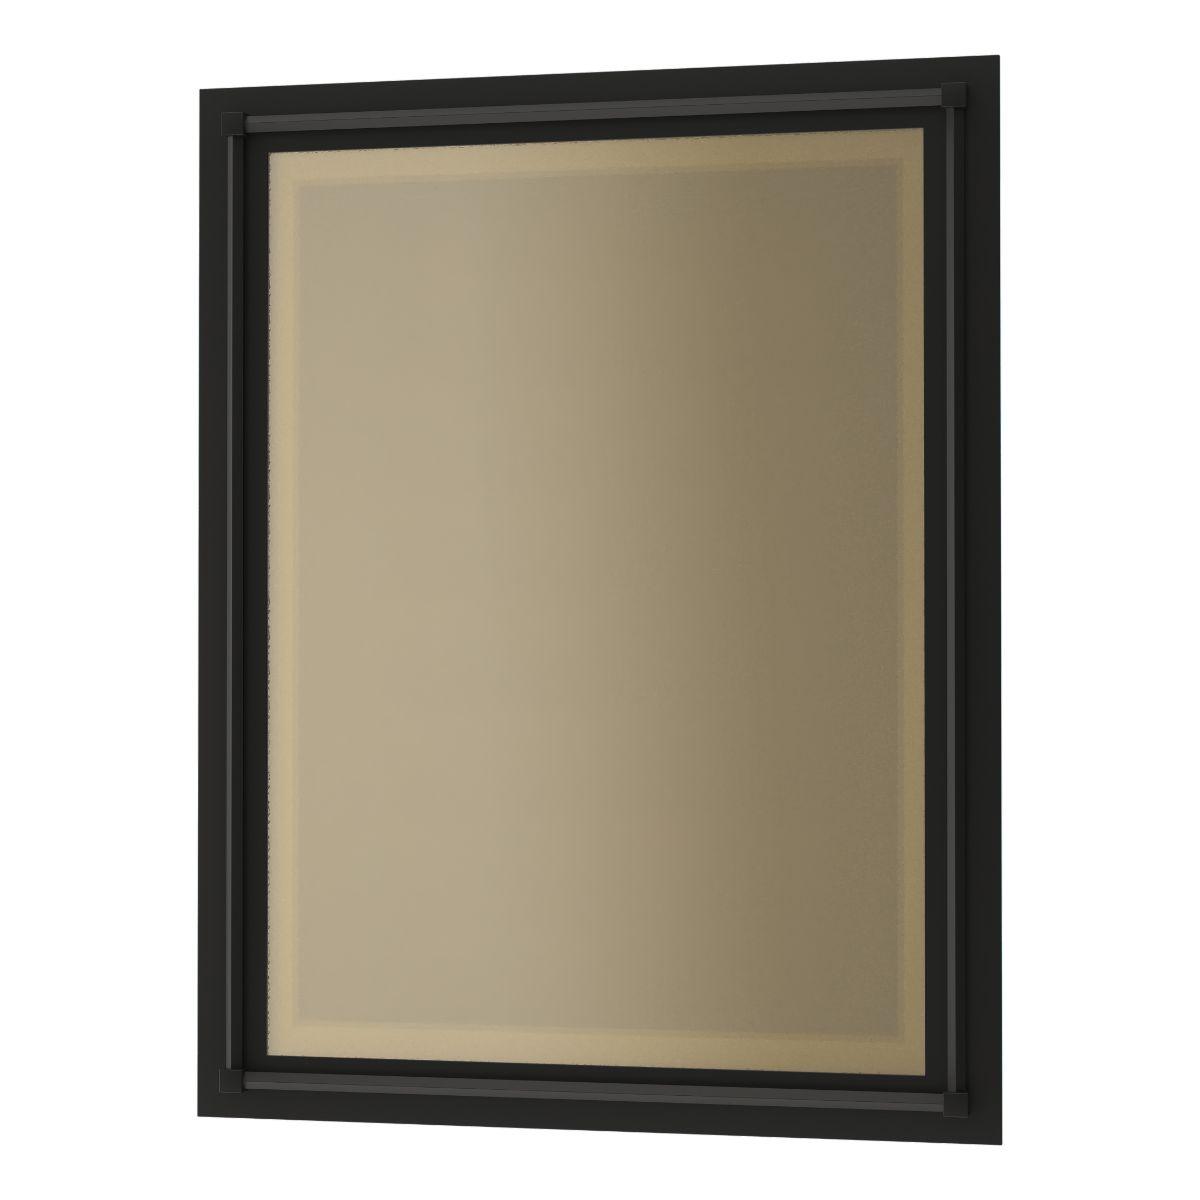 Rook Beveled Oval 22 In. X 32 In. Wall Mirror